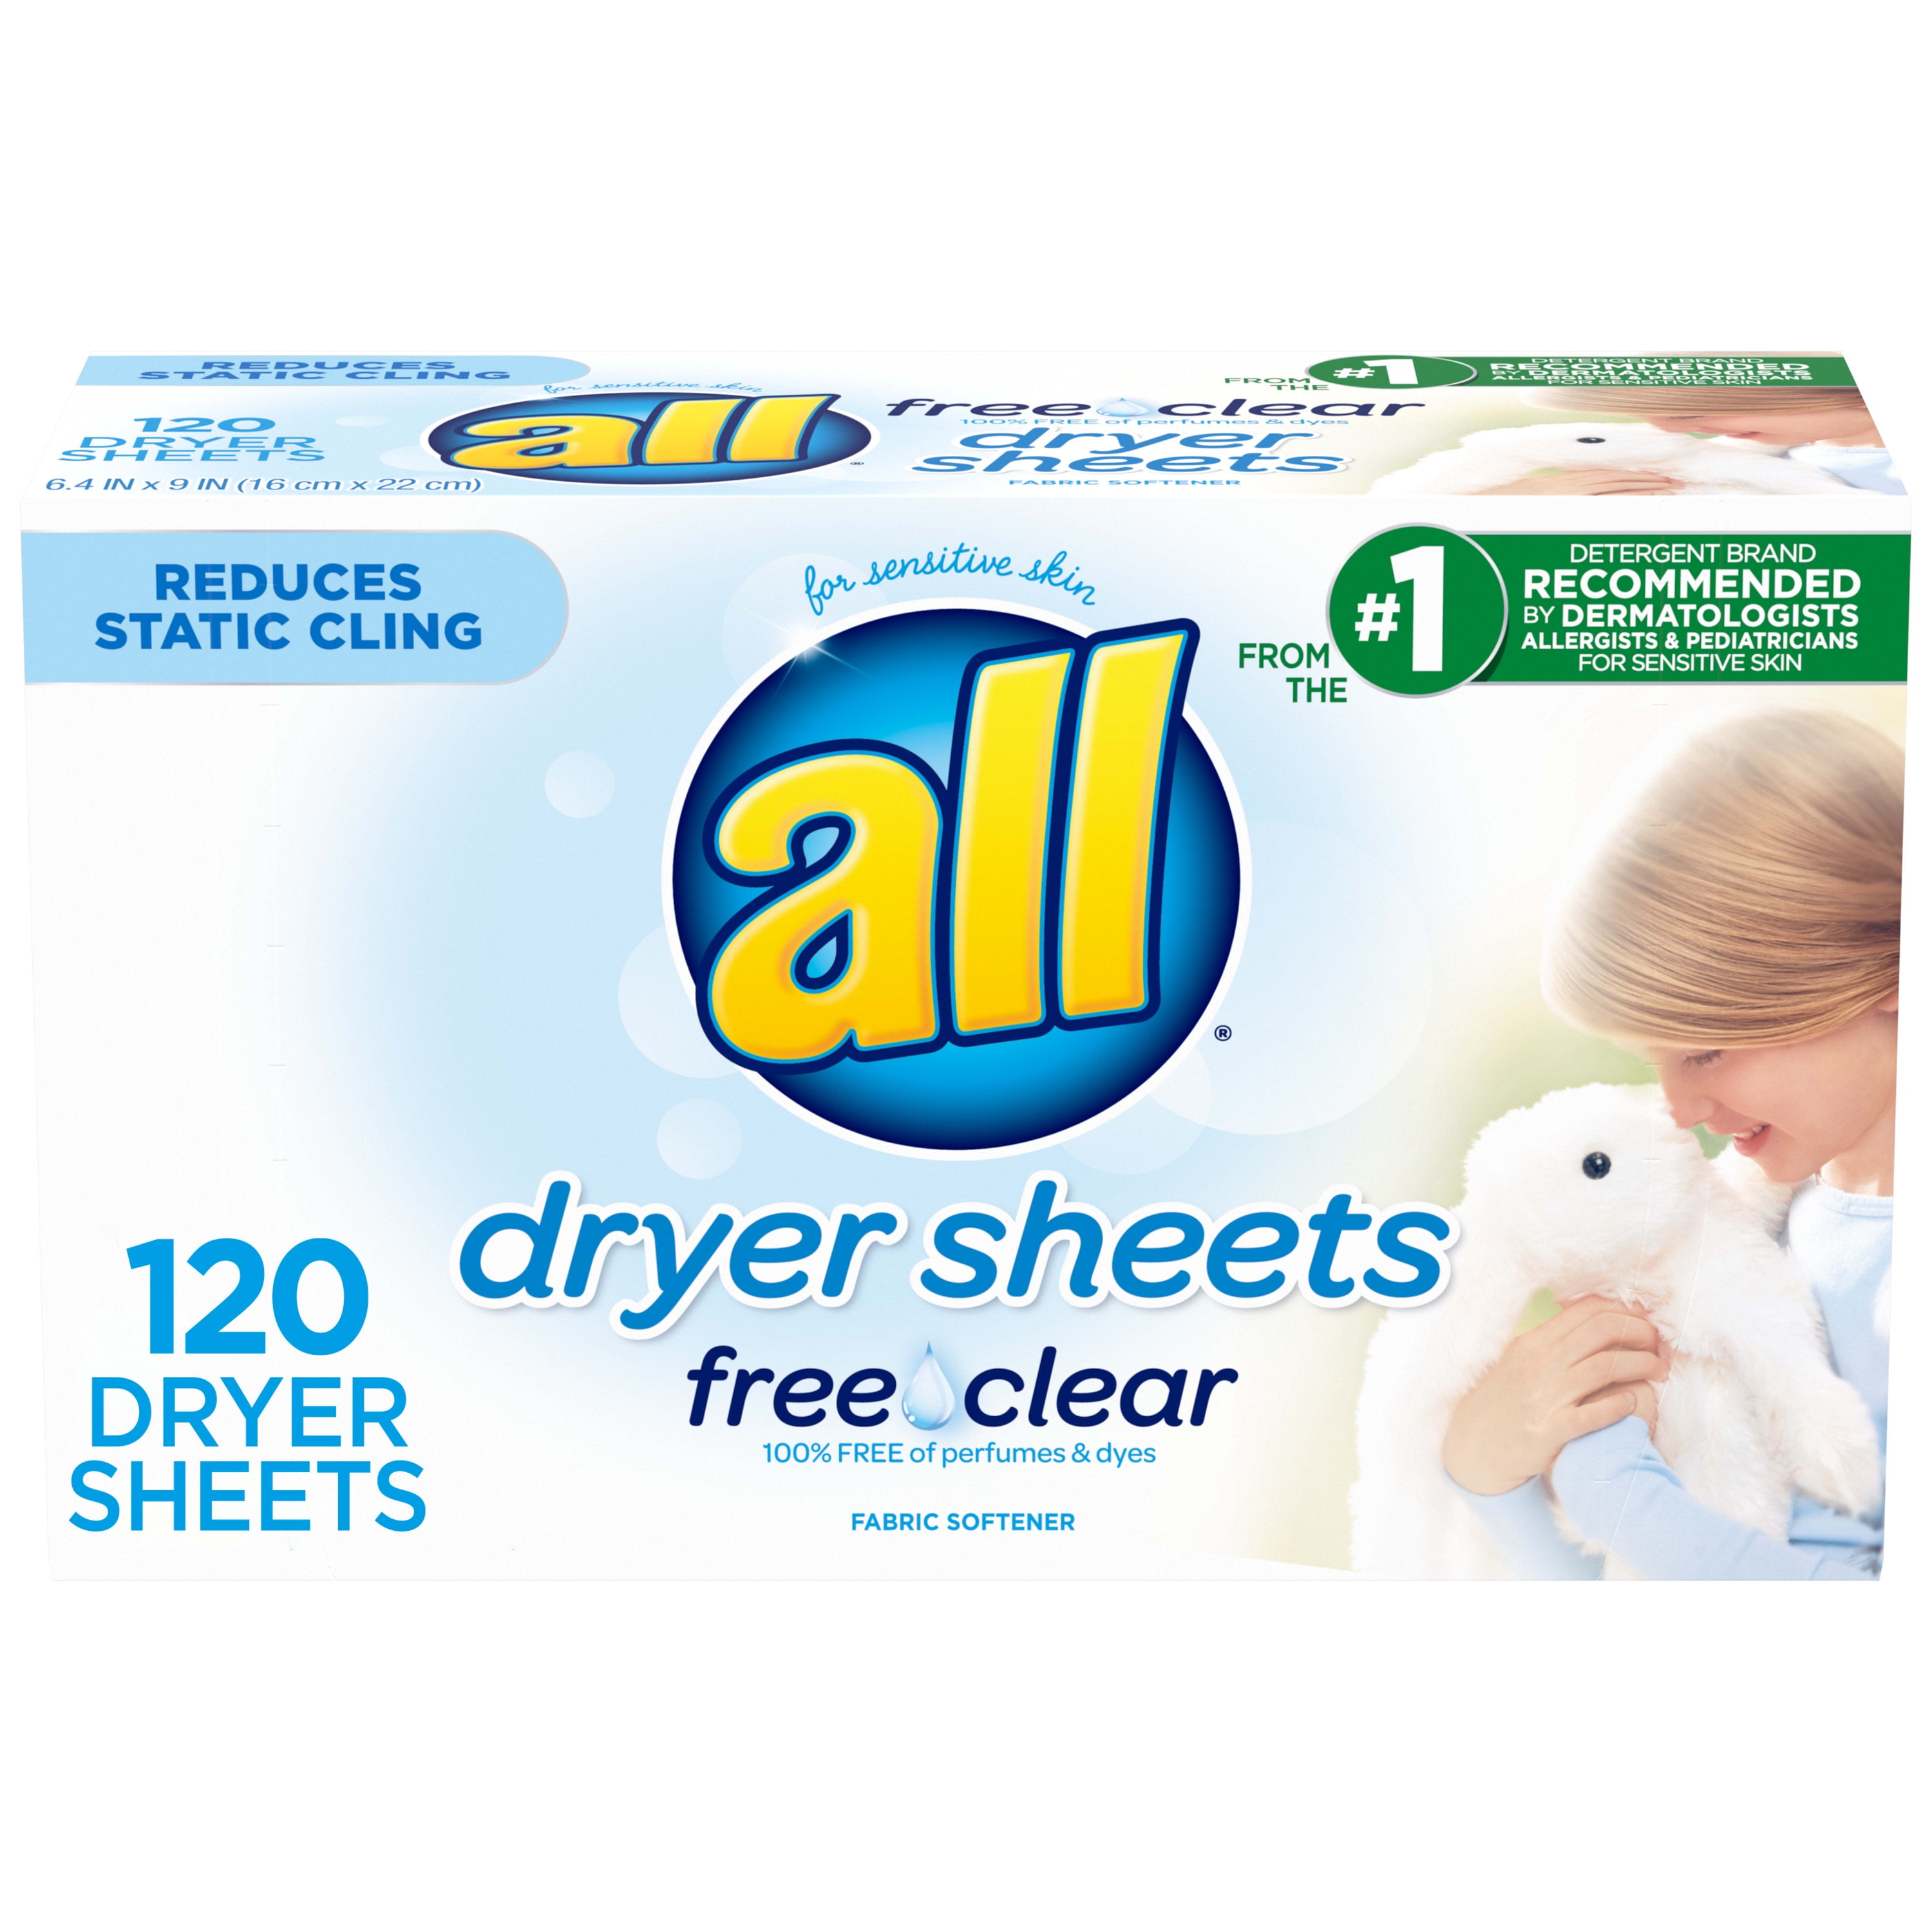 Dryer Sheets - Kleen Test Products Corporation